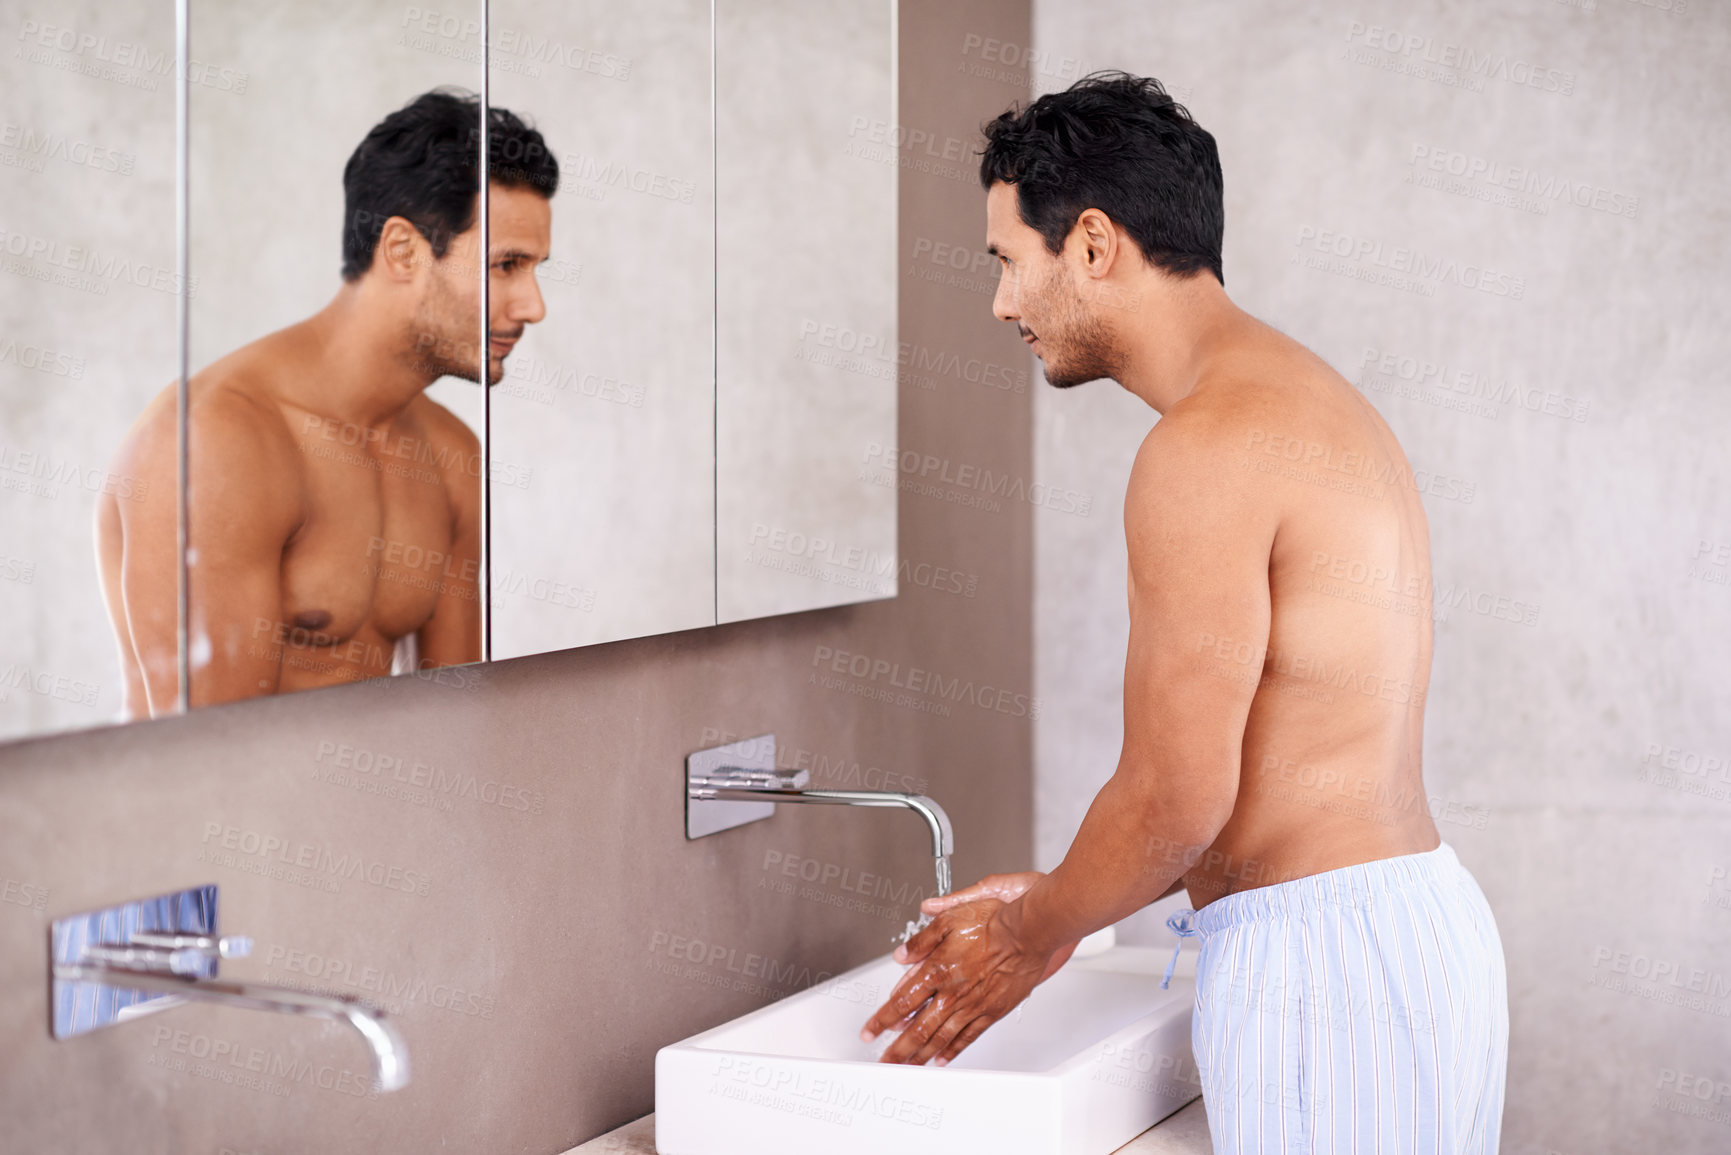 Buy stock photo Washing, skincare and mirror with man in bathroom for facial treatment, bacteria and hygiene. Healthy skin, dermatology and male person for grooming, wellness and morning routine in reflection.